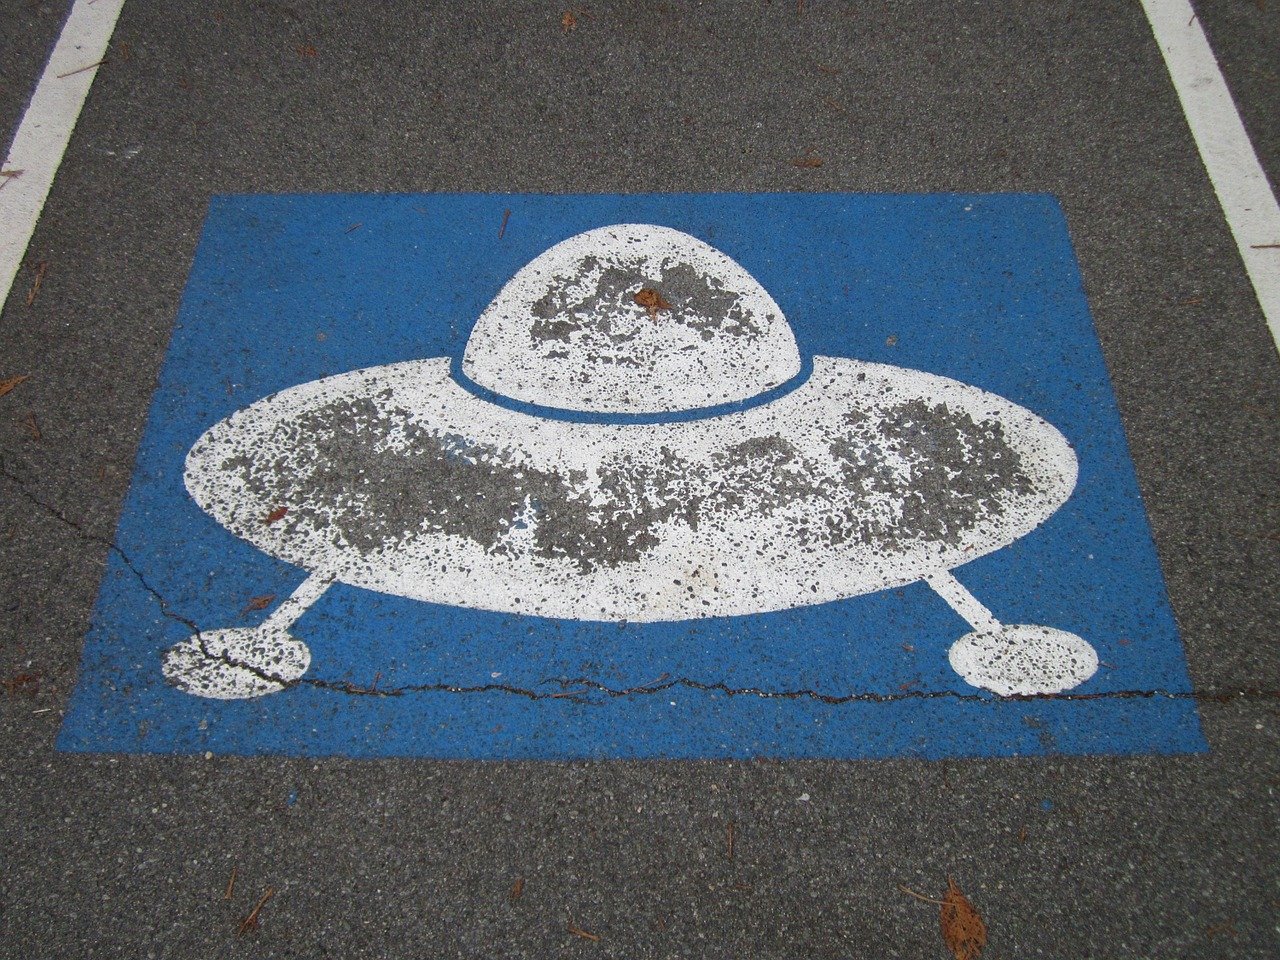 Photo of a parking space with a UFO landing sign on it.